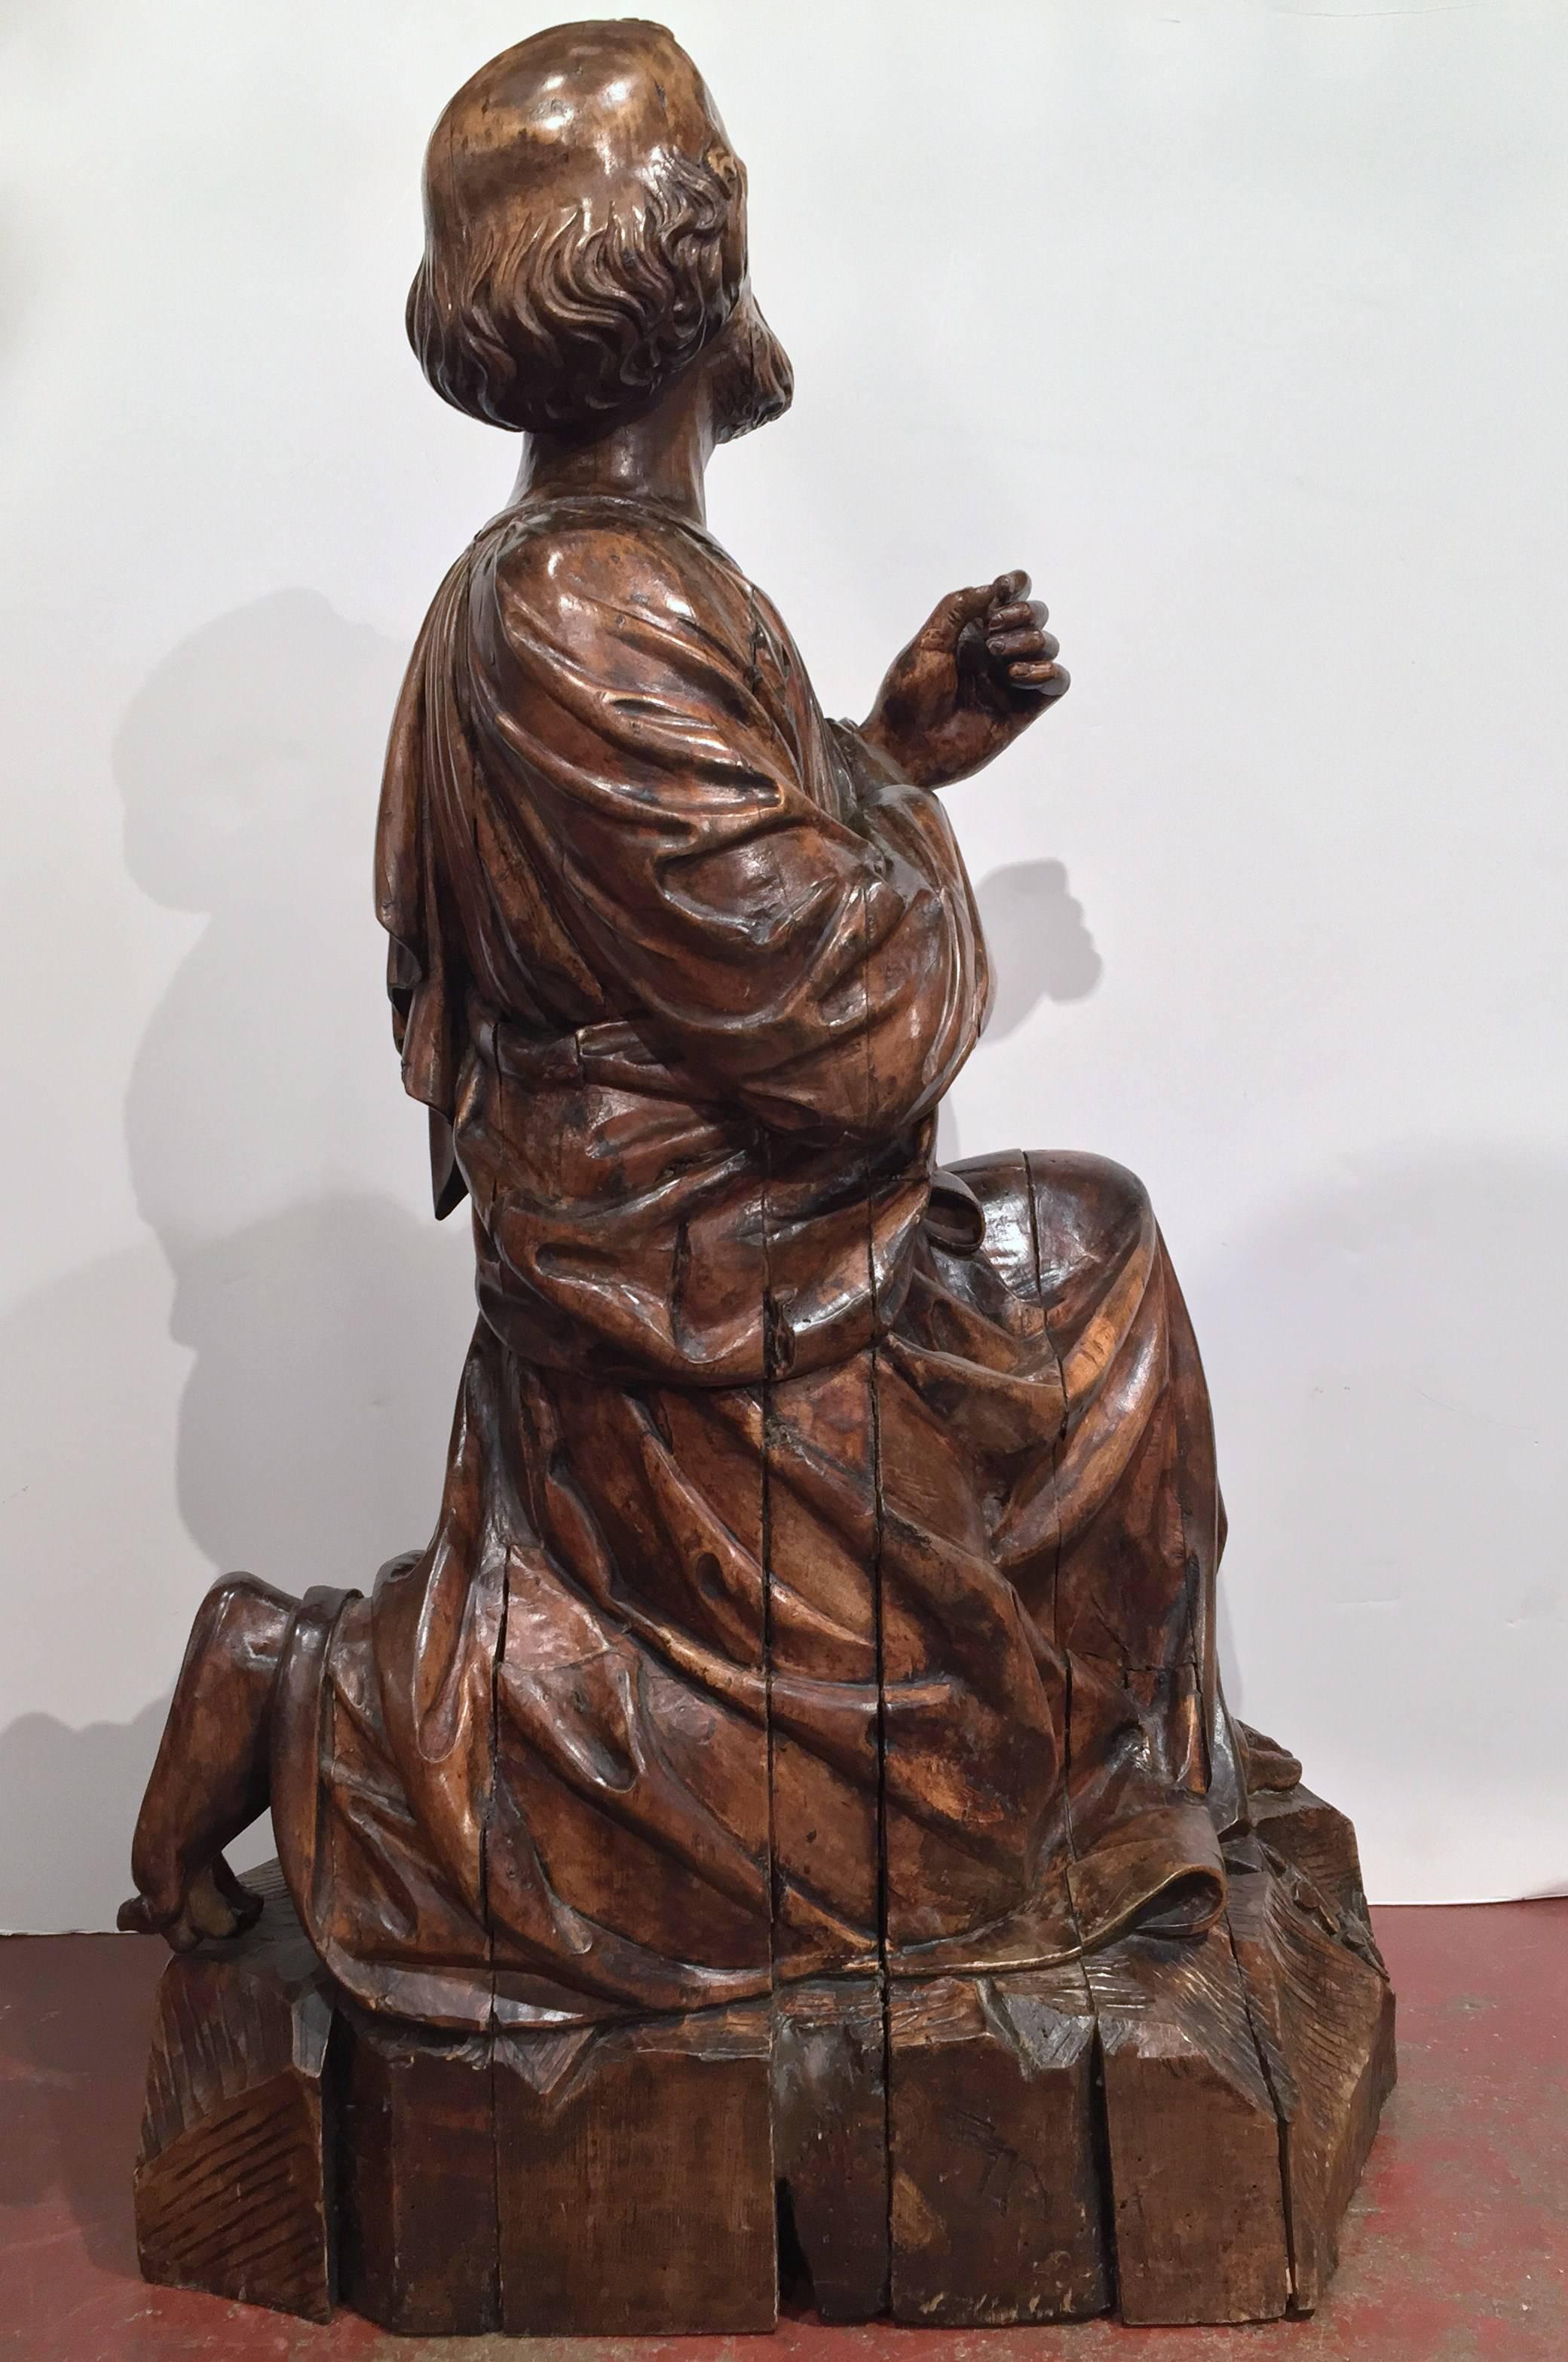 18th Century French Hand Carved Walnut Sculpture of Saint Peter the Apostle 1